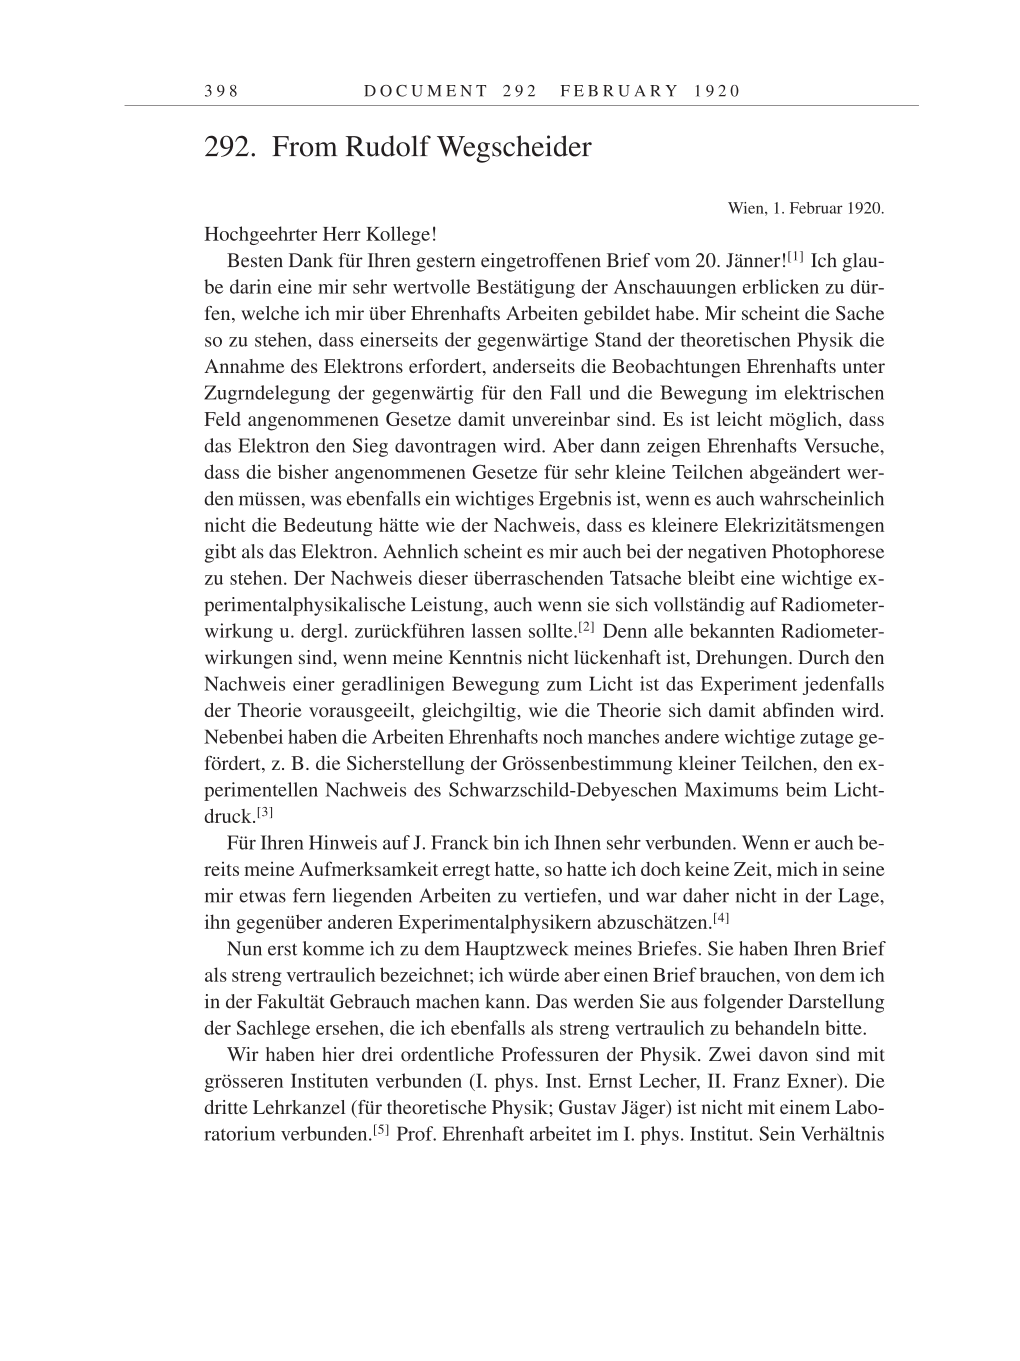 Volume 9: The Berlin Years: Correspondence January 1919-April 1920 page 398